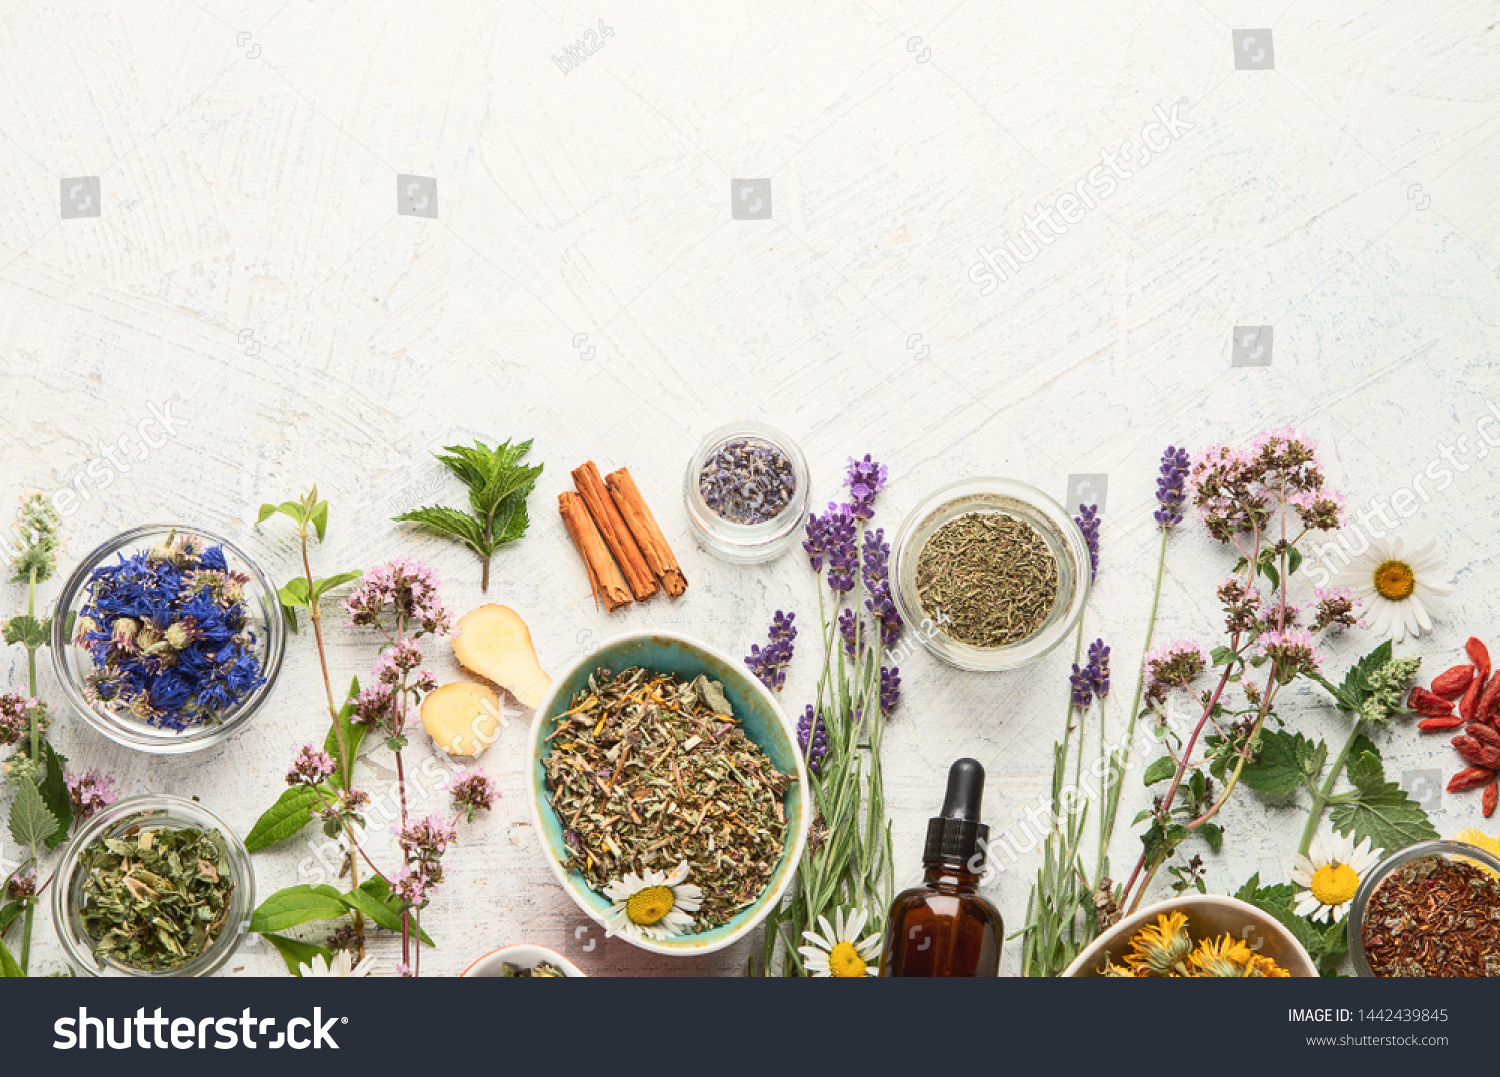 Various kinds of herbal tea. Natural herbs medicine. Top view with copy space #1442439845